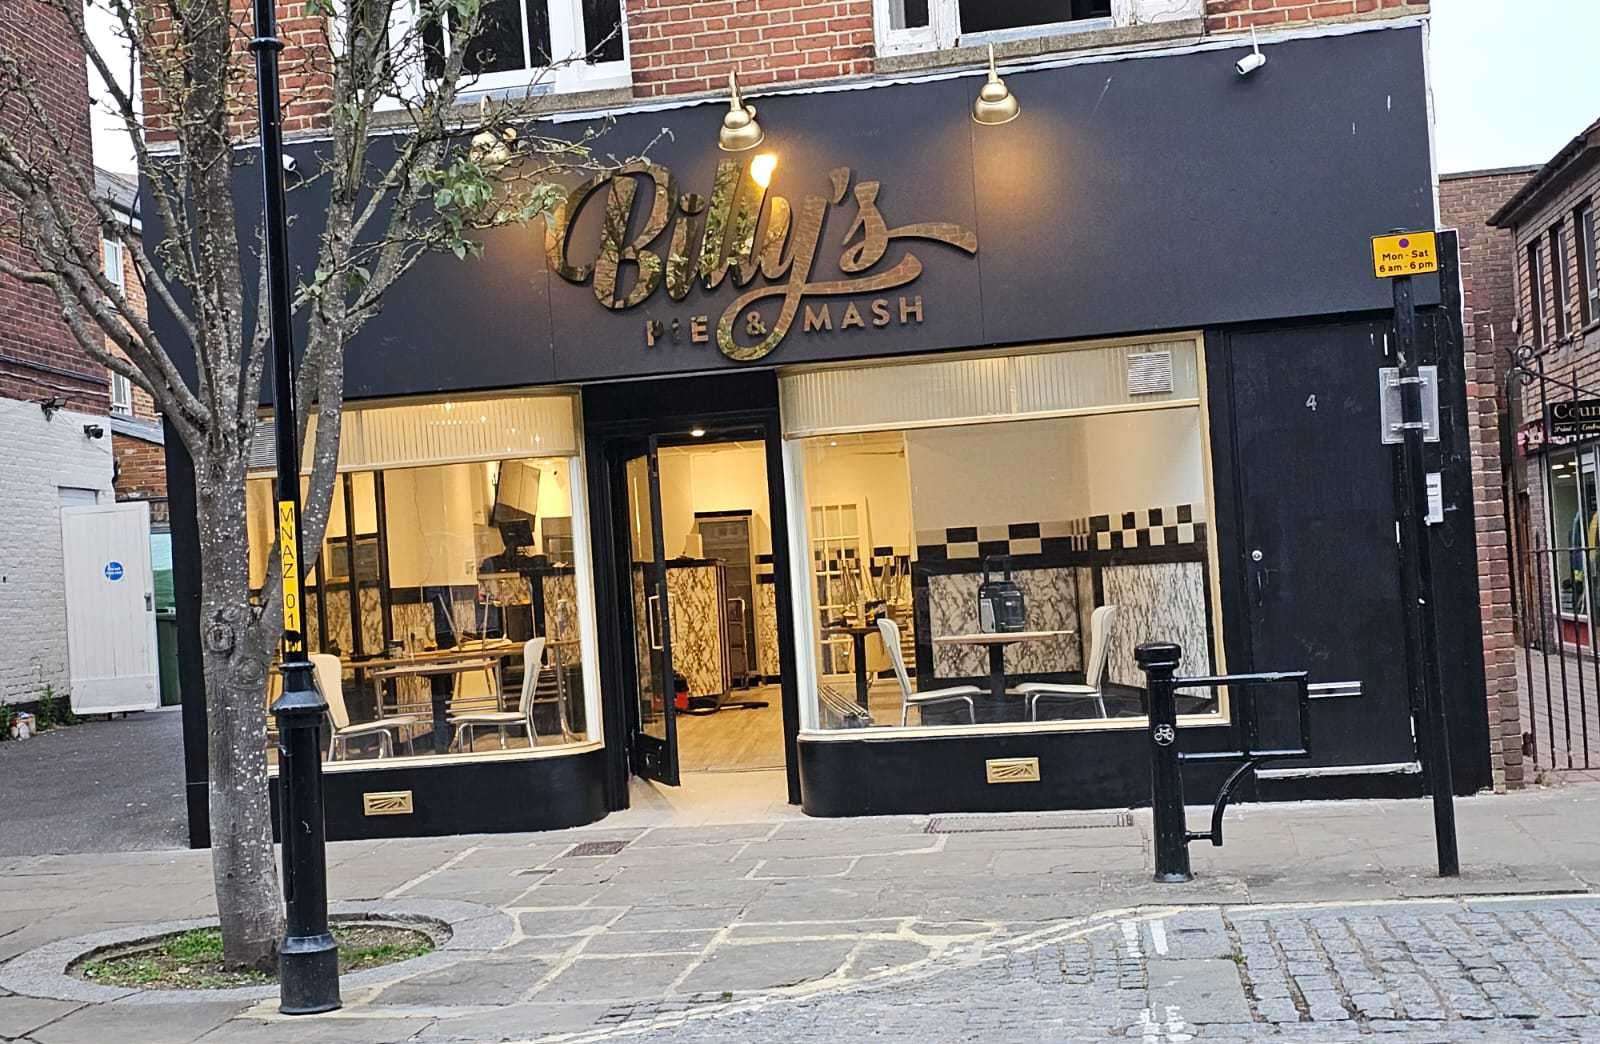 Billy’s Pie and Mash is set to open in North Street